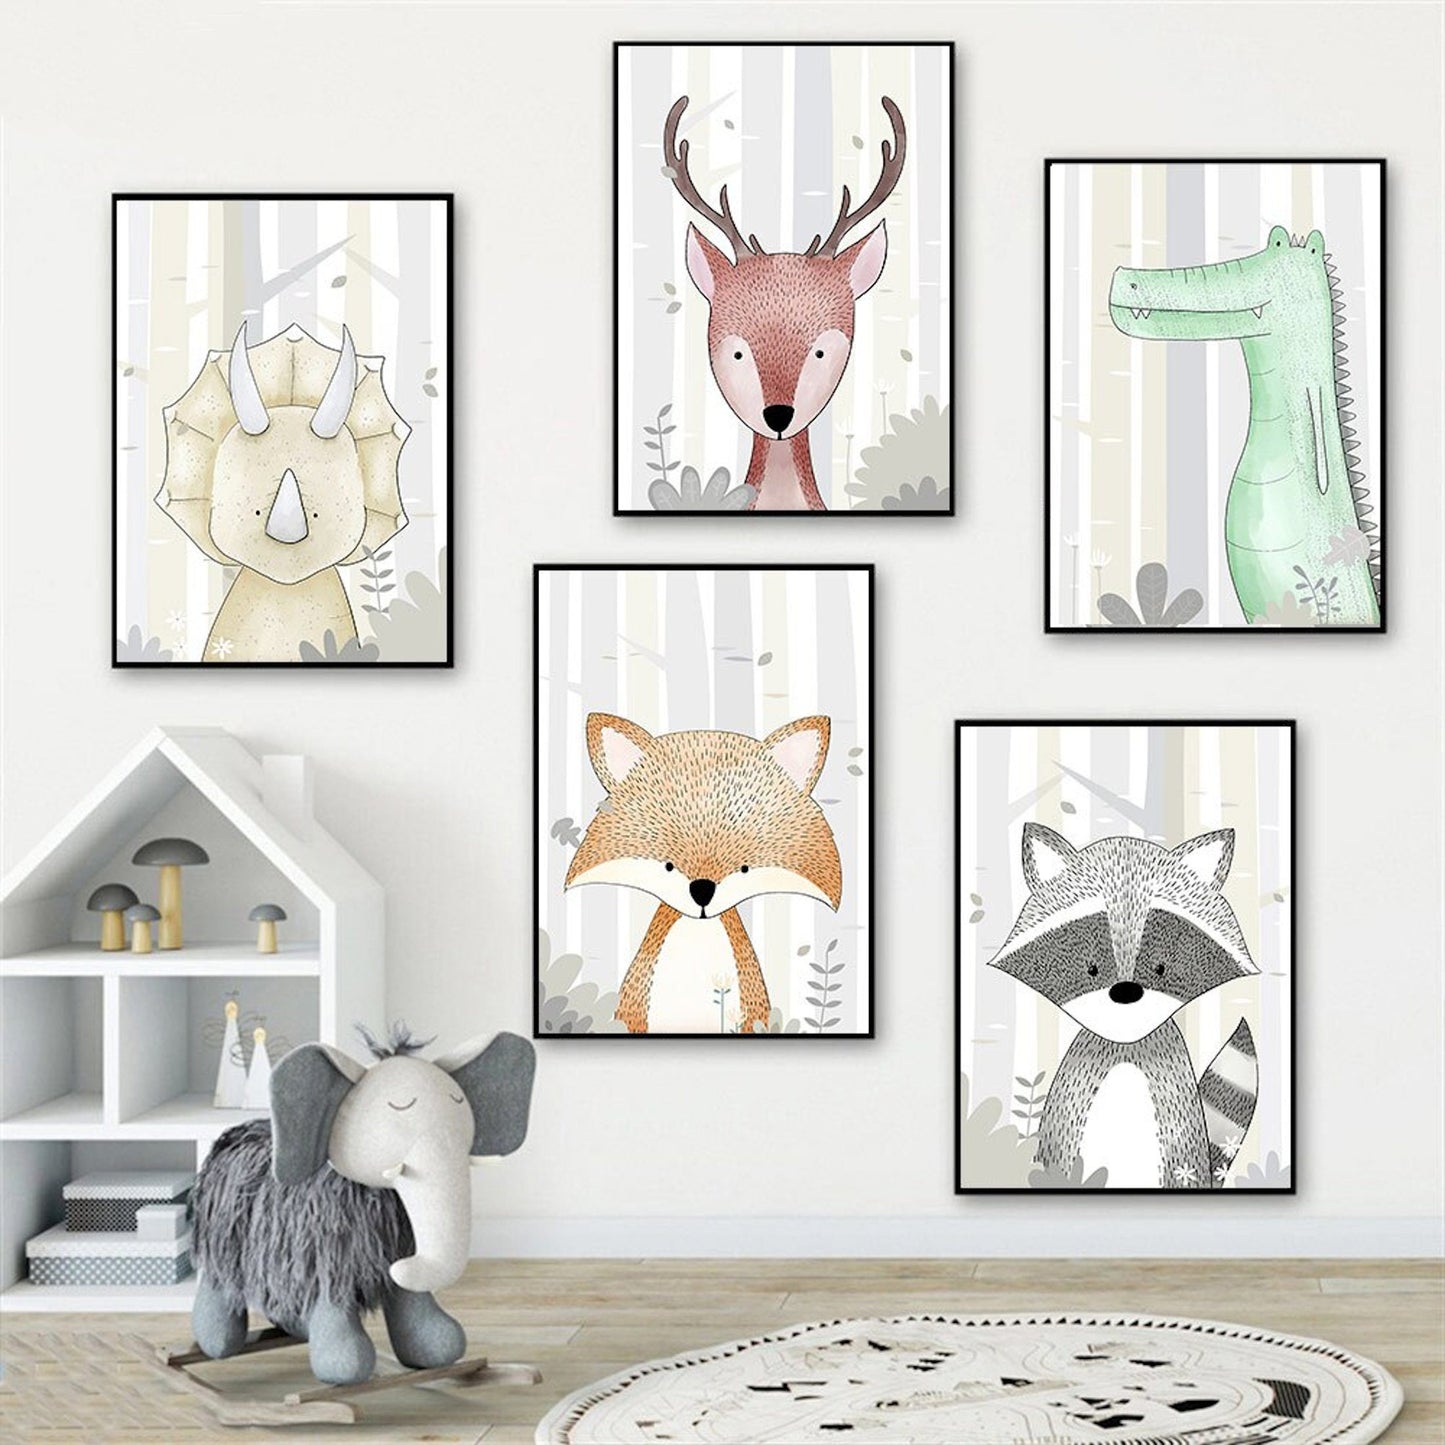 Poster children's room dinosaurs and animals pictures fox deer T-Rex and Triceratops as a decorative print without a frame